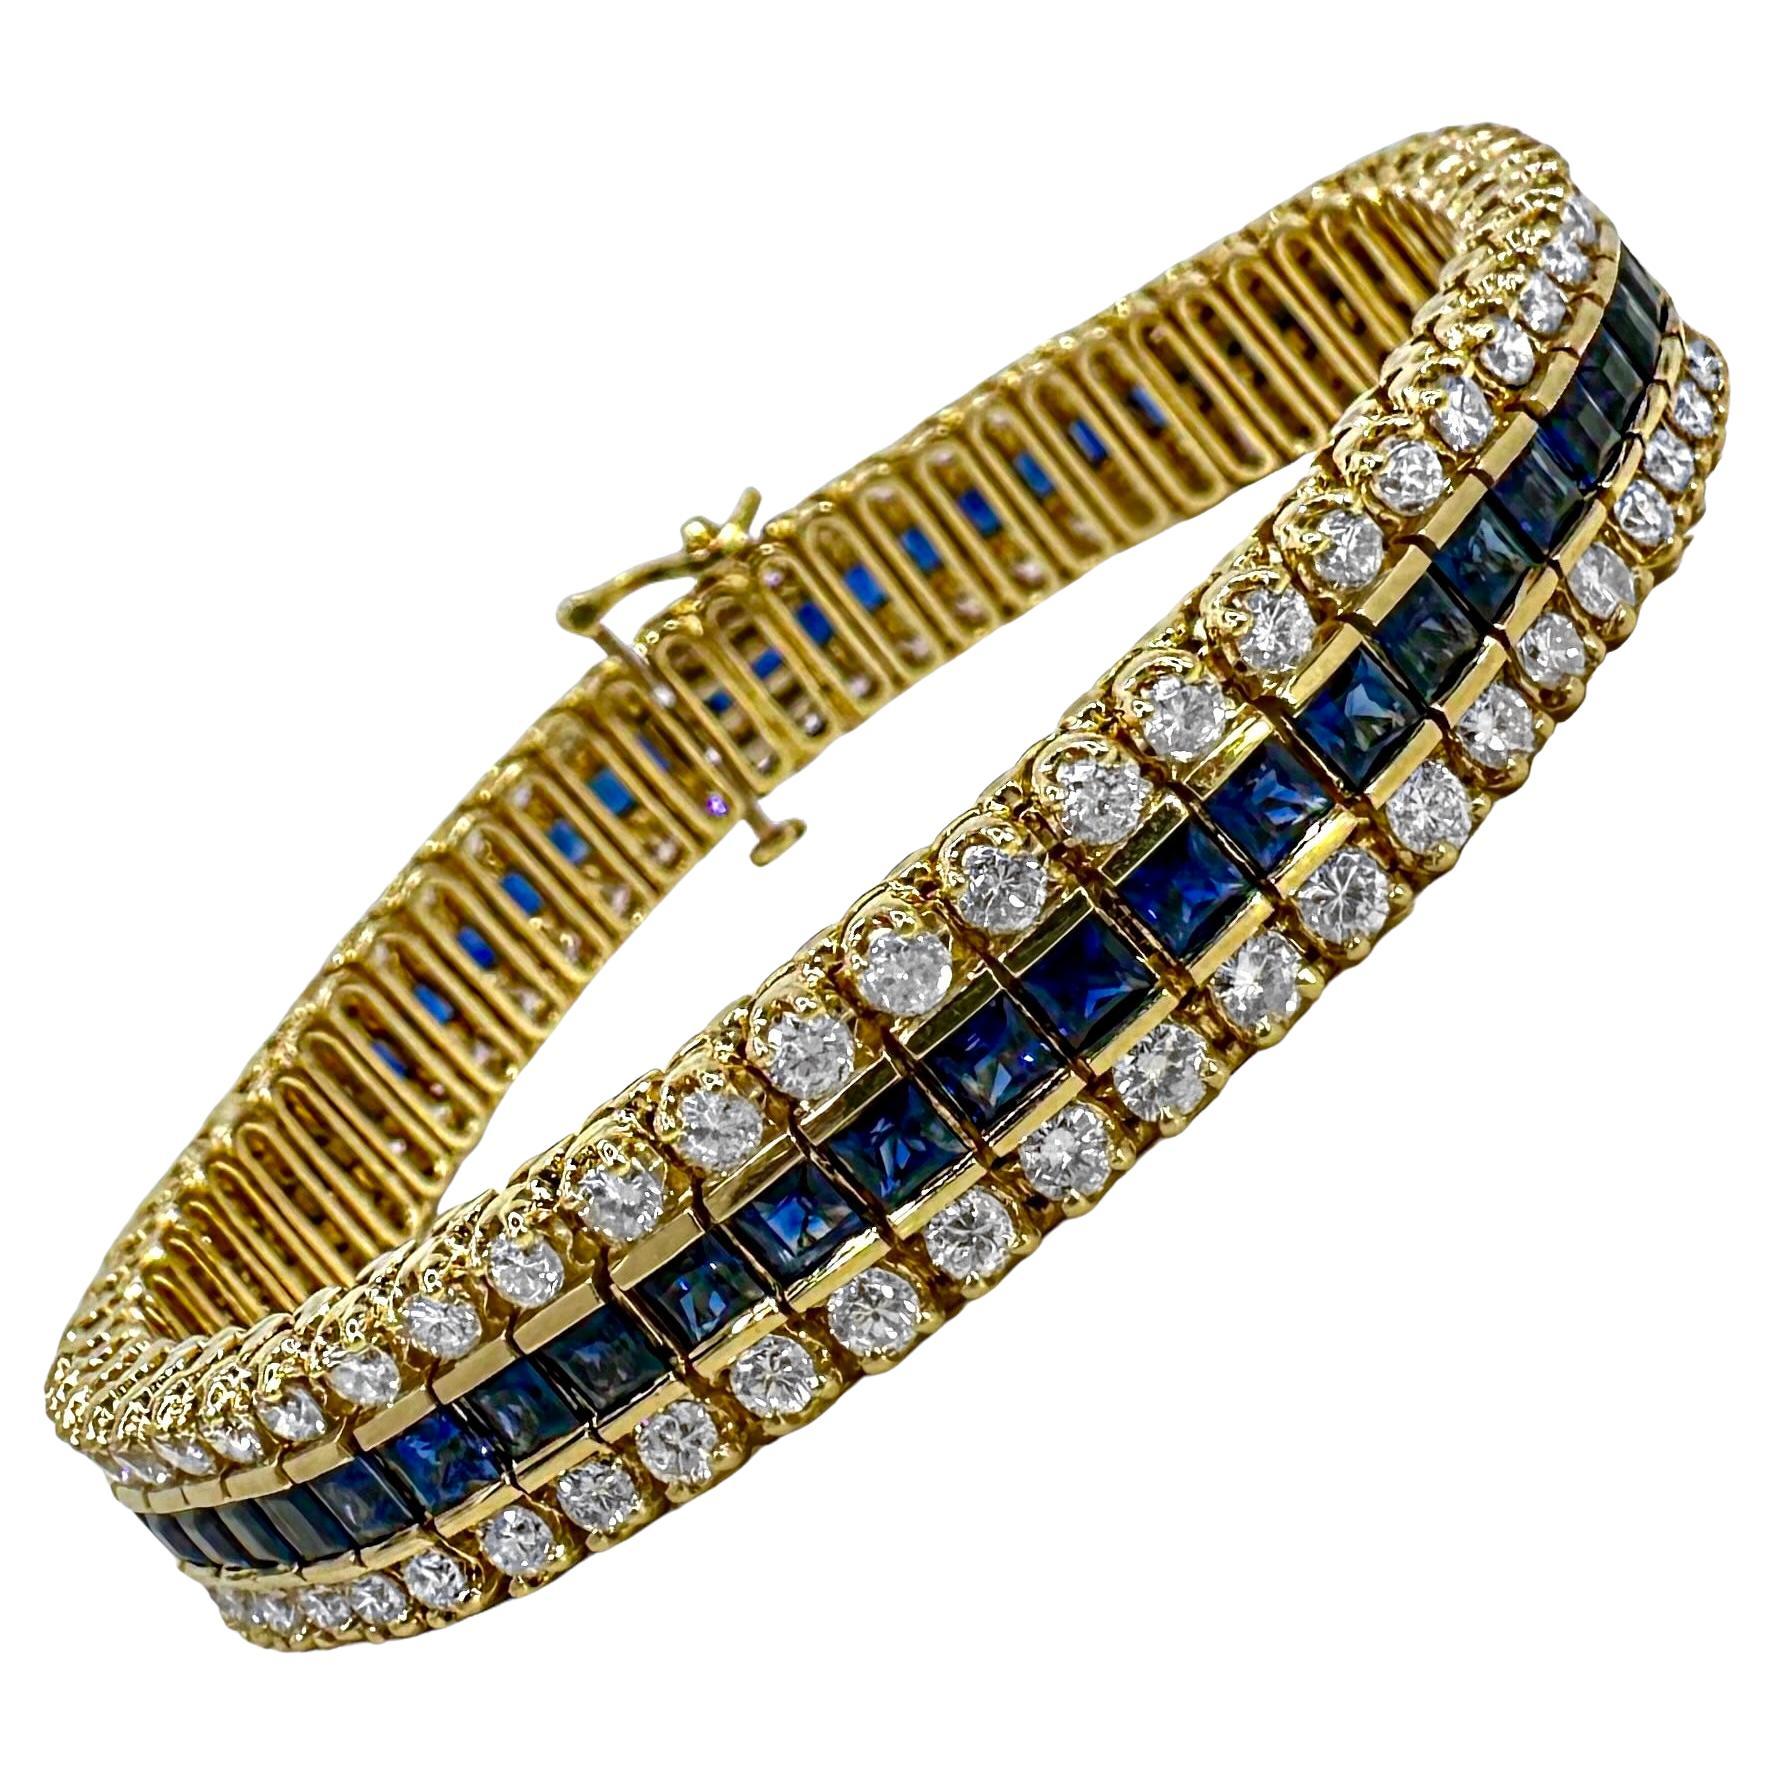 3 Row Gold Tennis Bracelet With 2 Diamond Rows Surrounding 1 Row of Sapphires For Sale